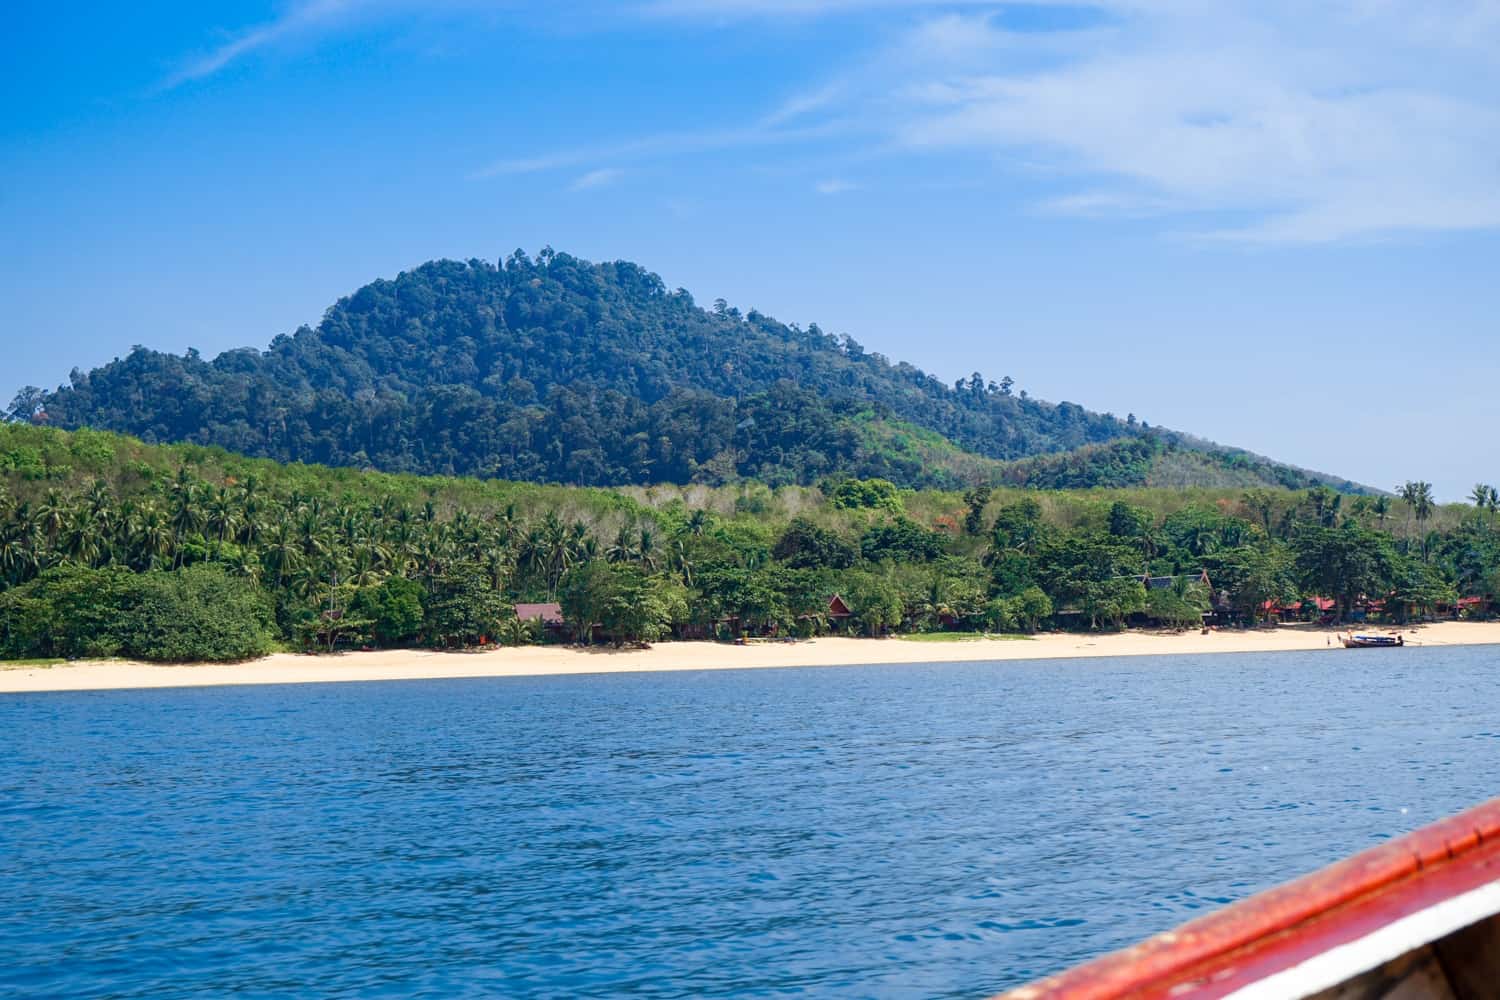 Koh Libong from the water